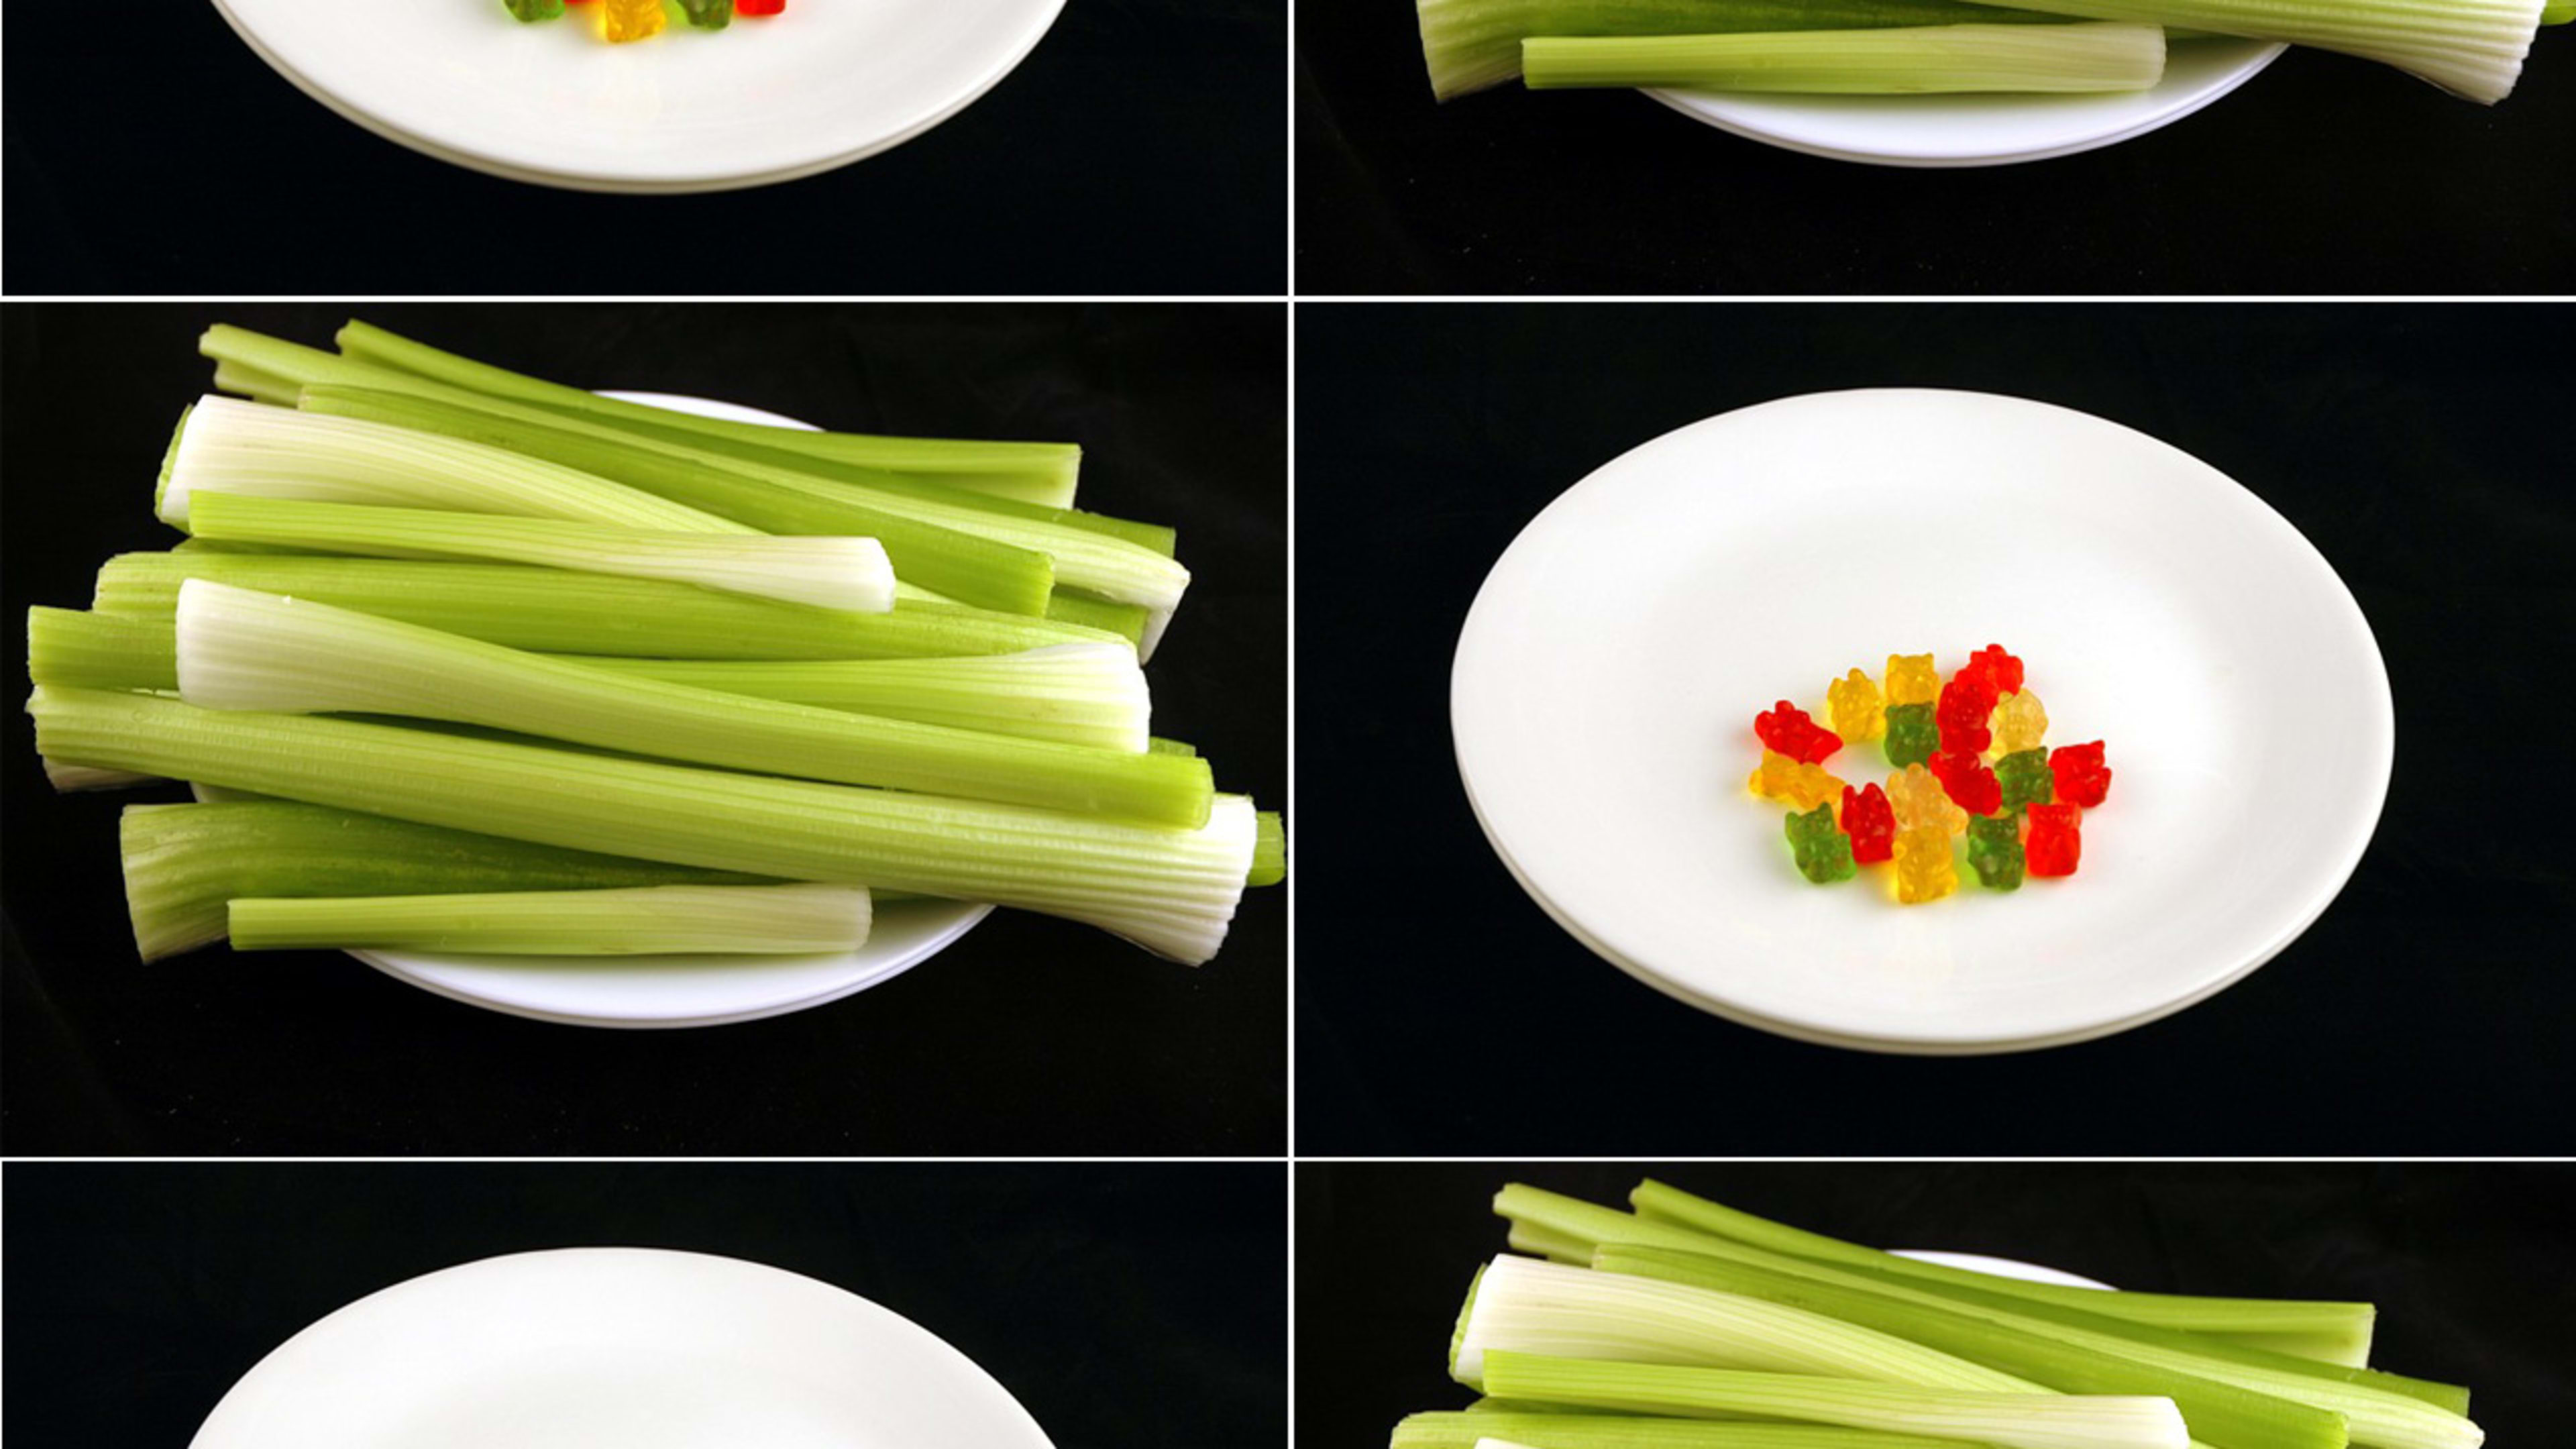 This Is What 200 Calories Looks Like